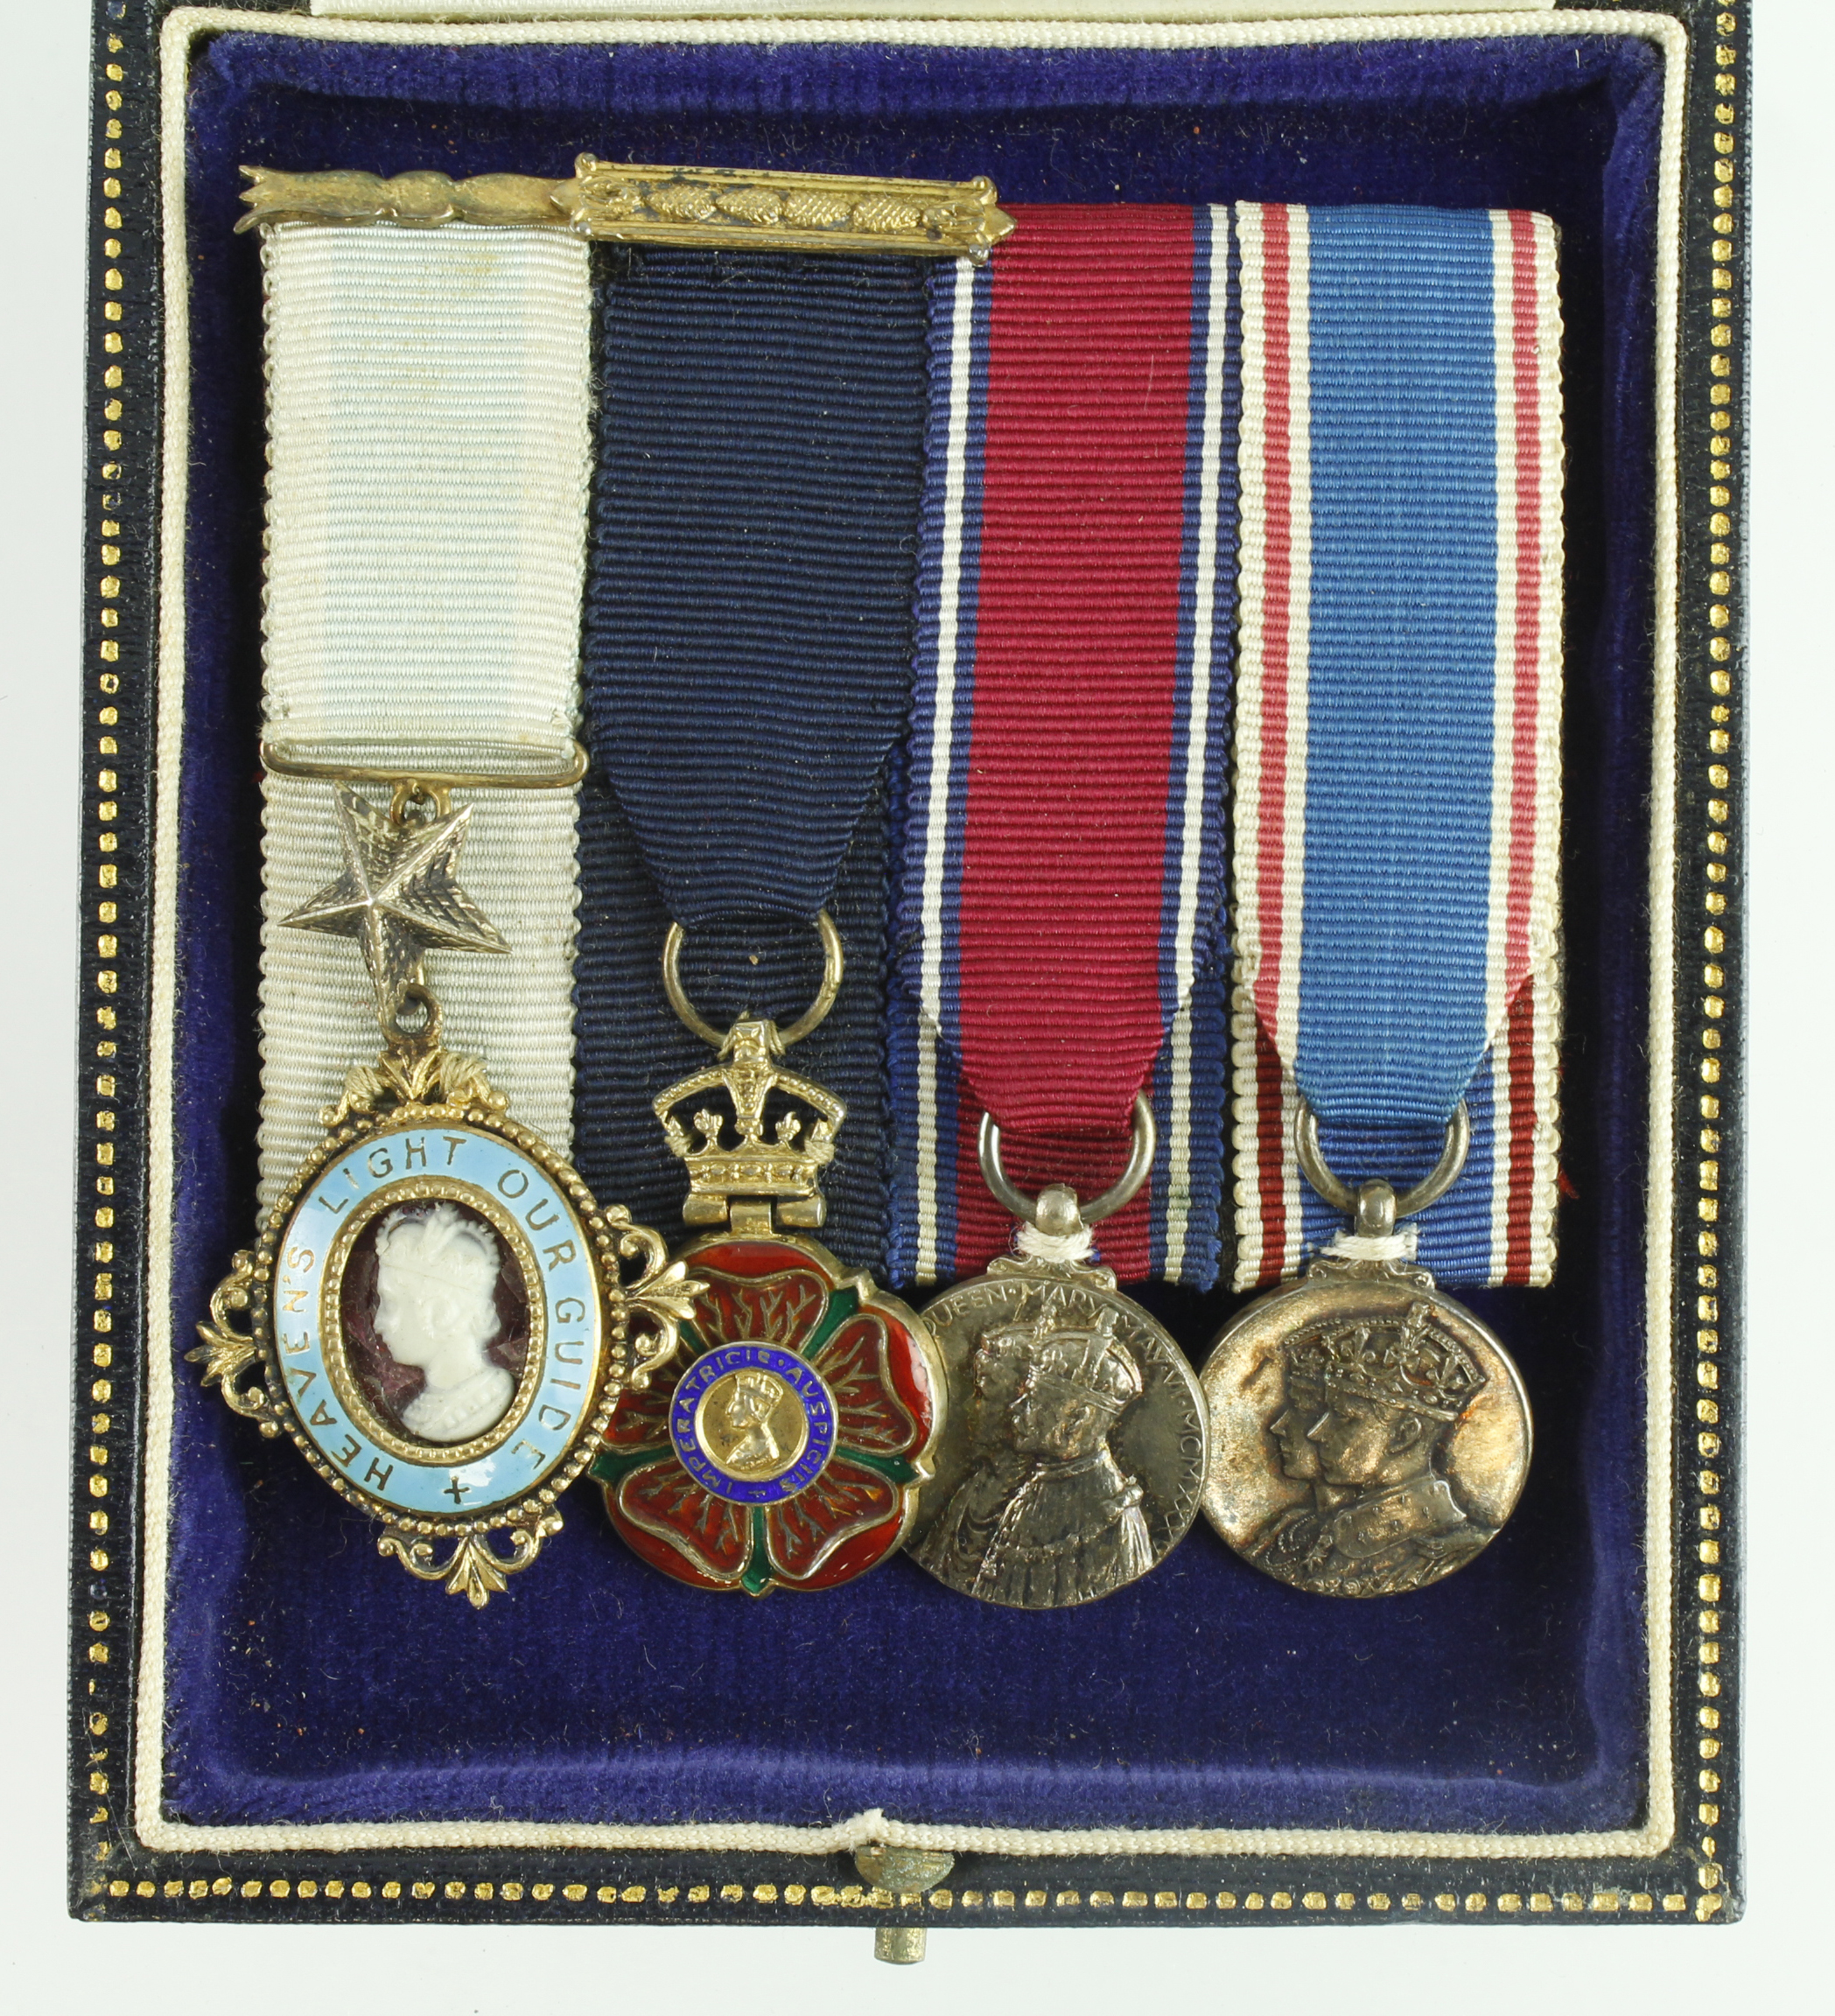 Miniature Medal group mounted as worn - Most Exalted Order of the Star of India Breast Badge (silver